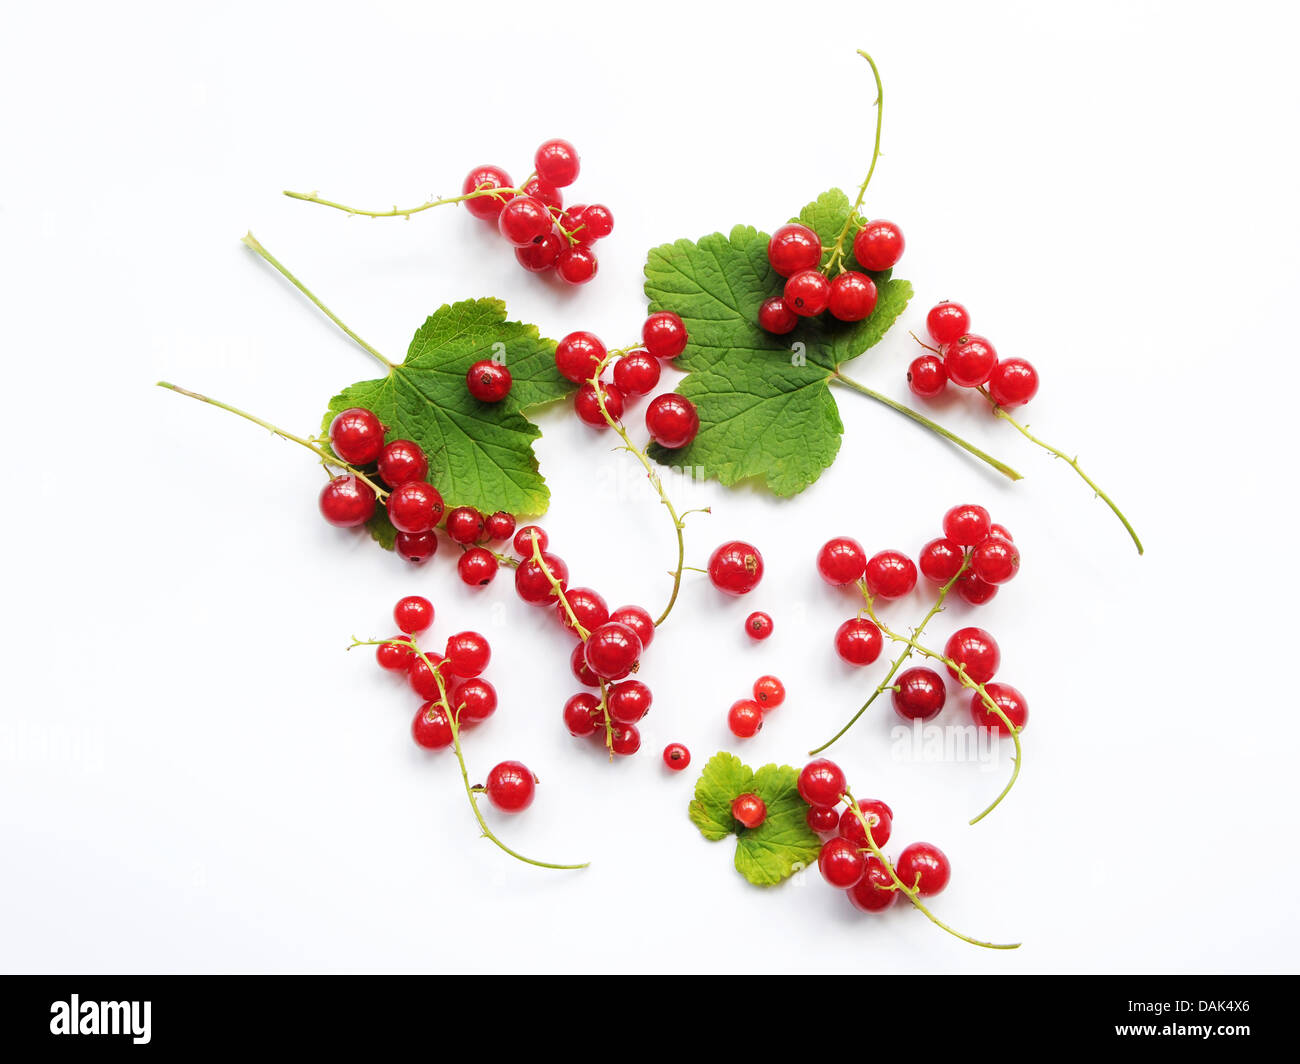 Redcurrants on a white background. Stock Photo